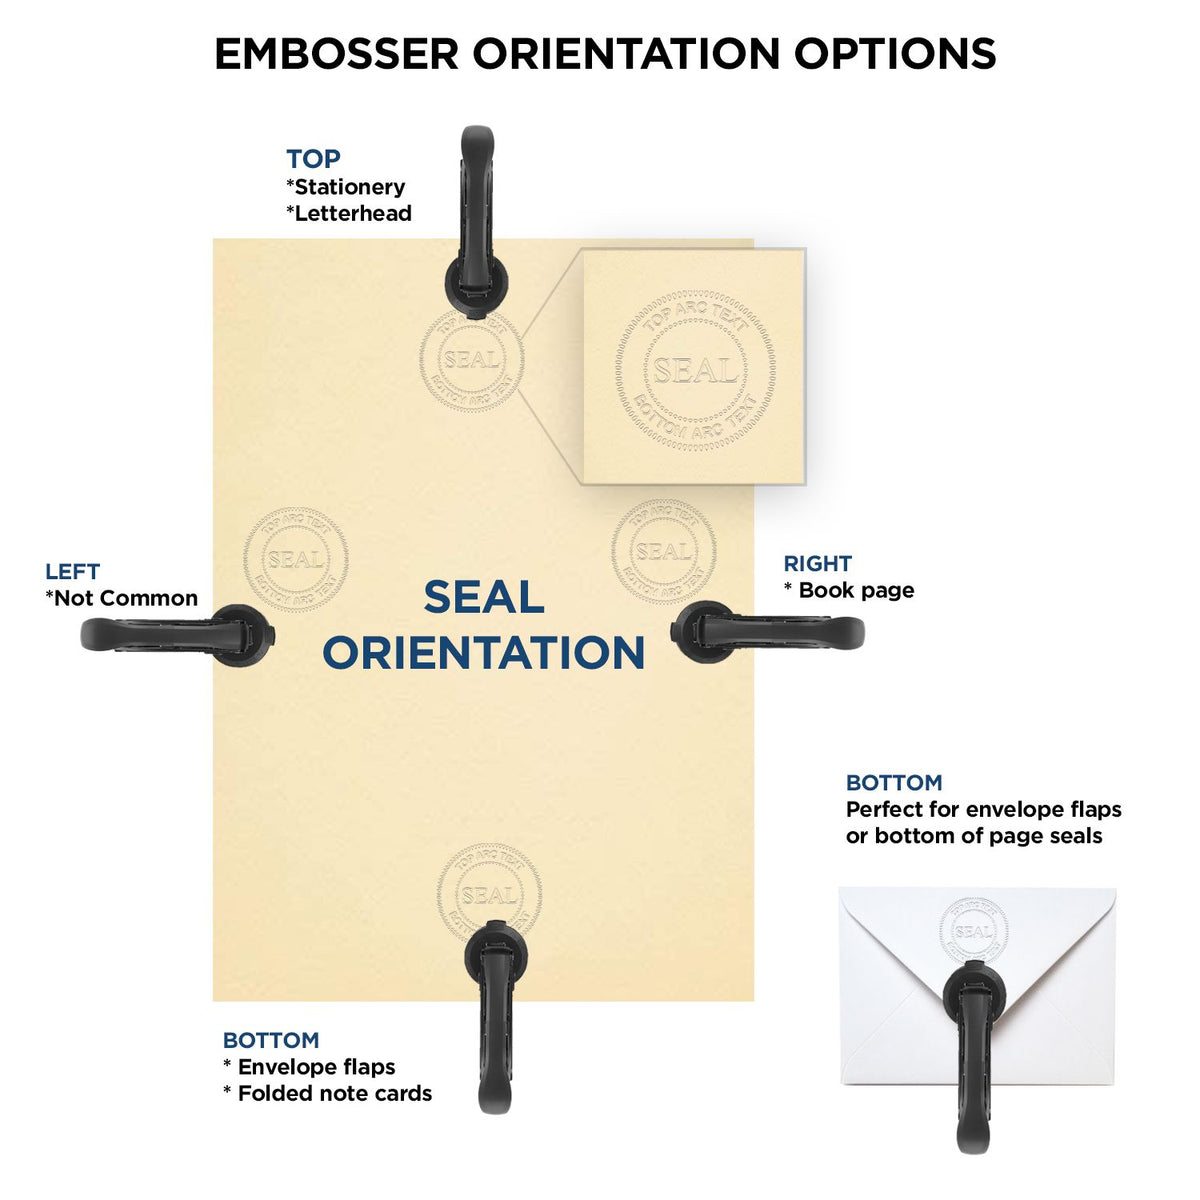 An infographic for the Heavy Duty Cast Iron Montana Land Surveyor Seal Embosser showing embosser orientation, this is showing examples of a top, bottom, right and left insert.